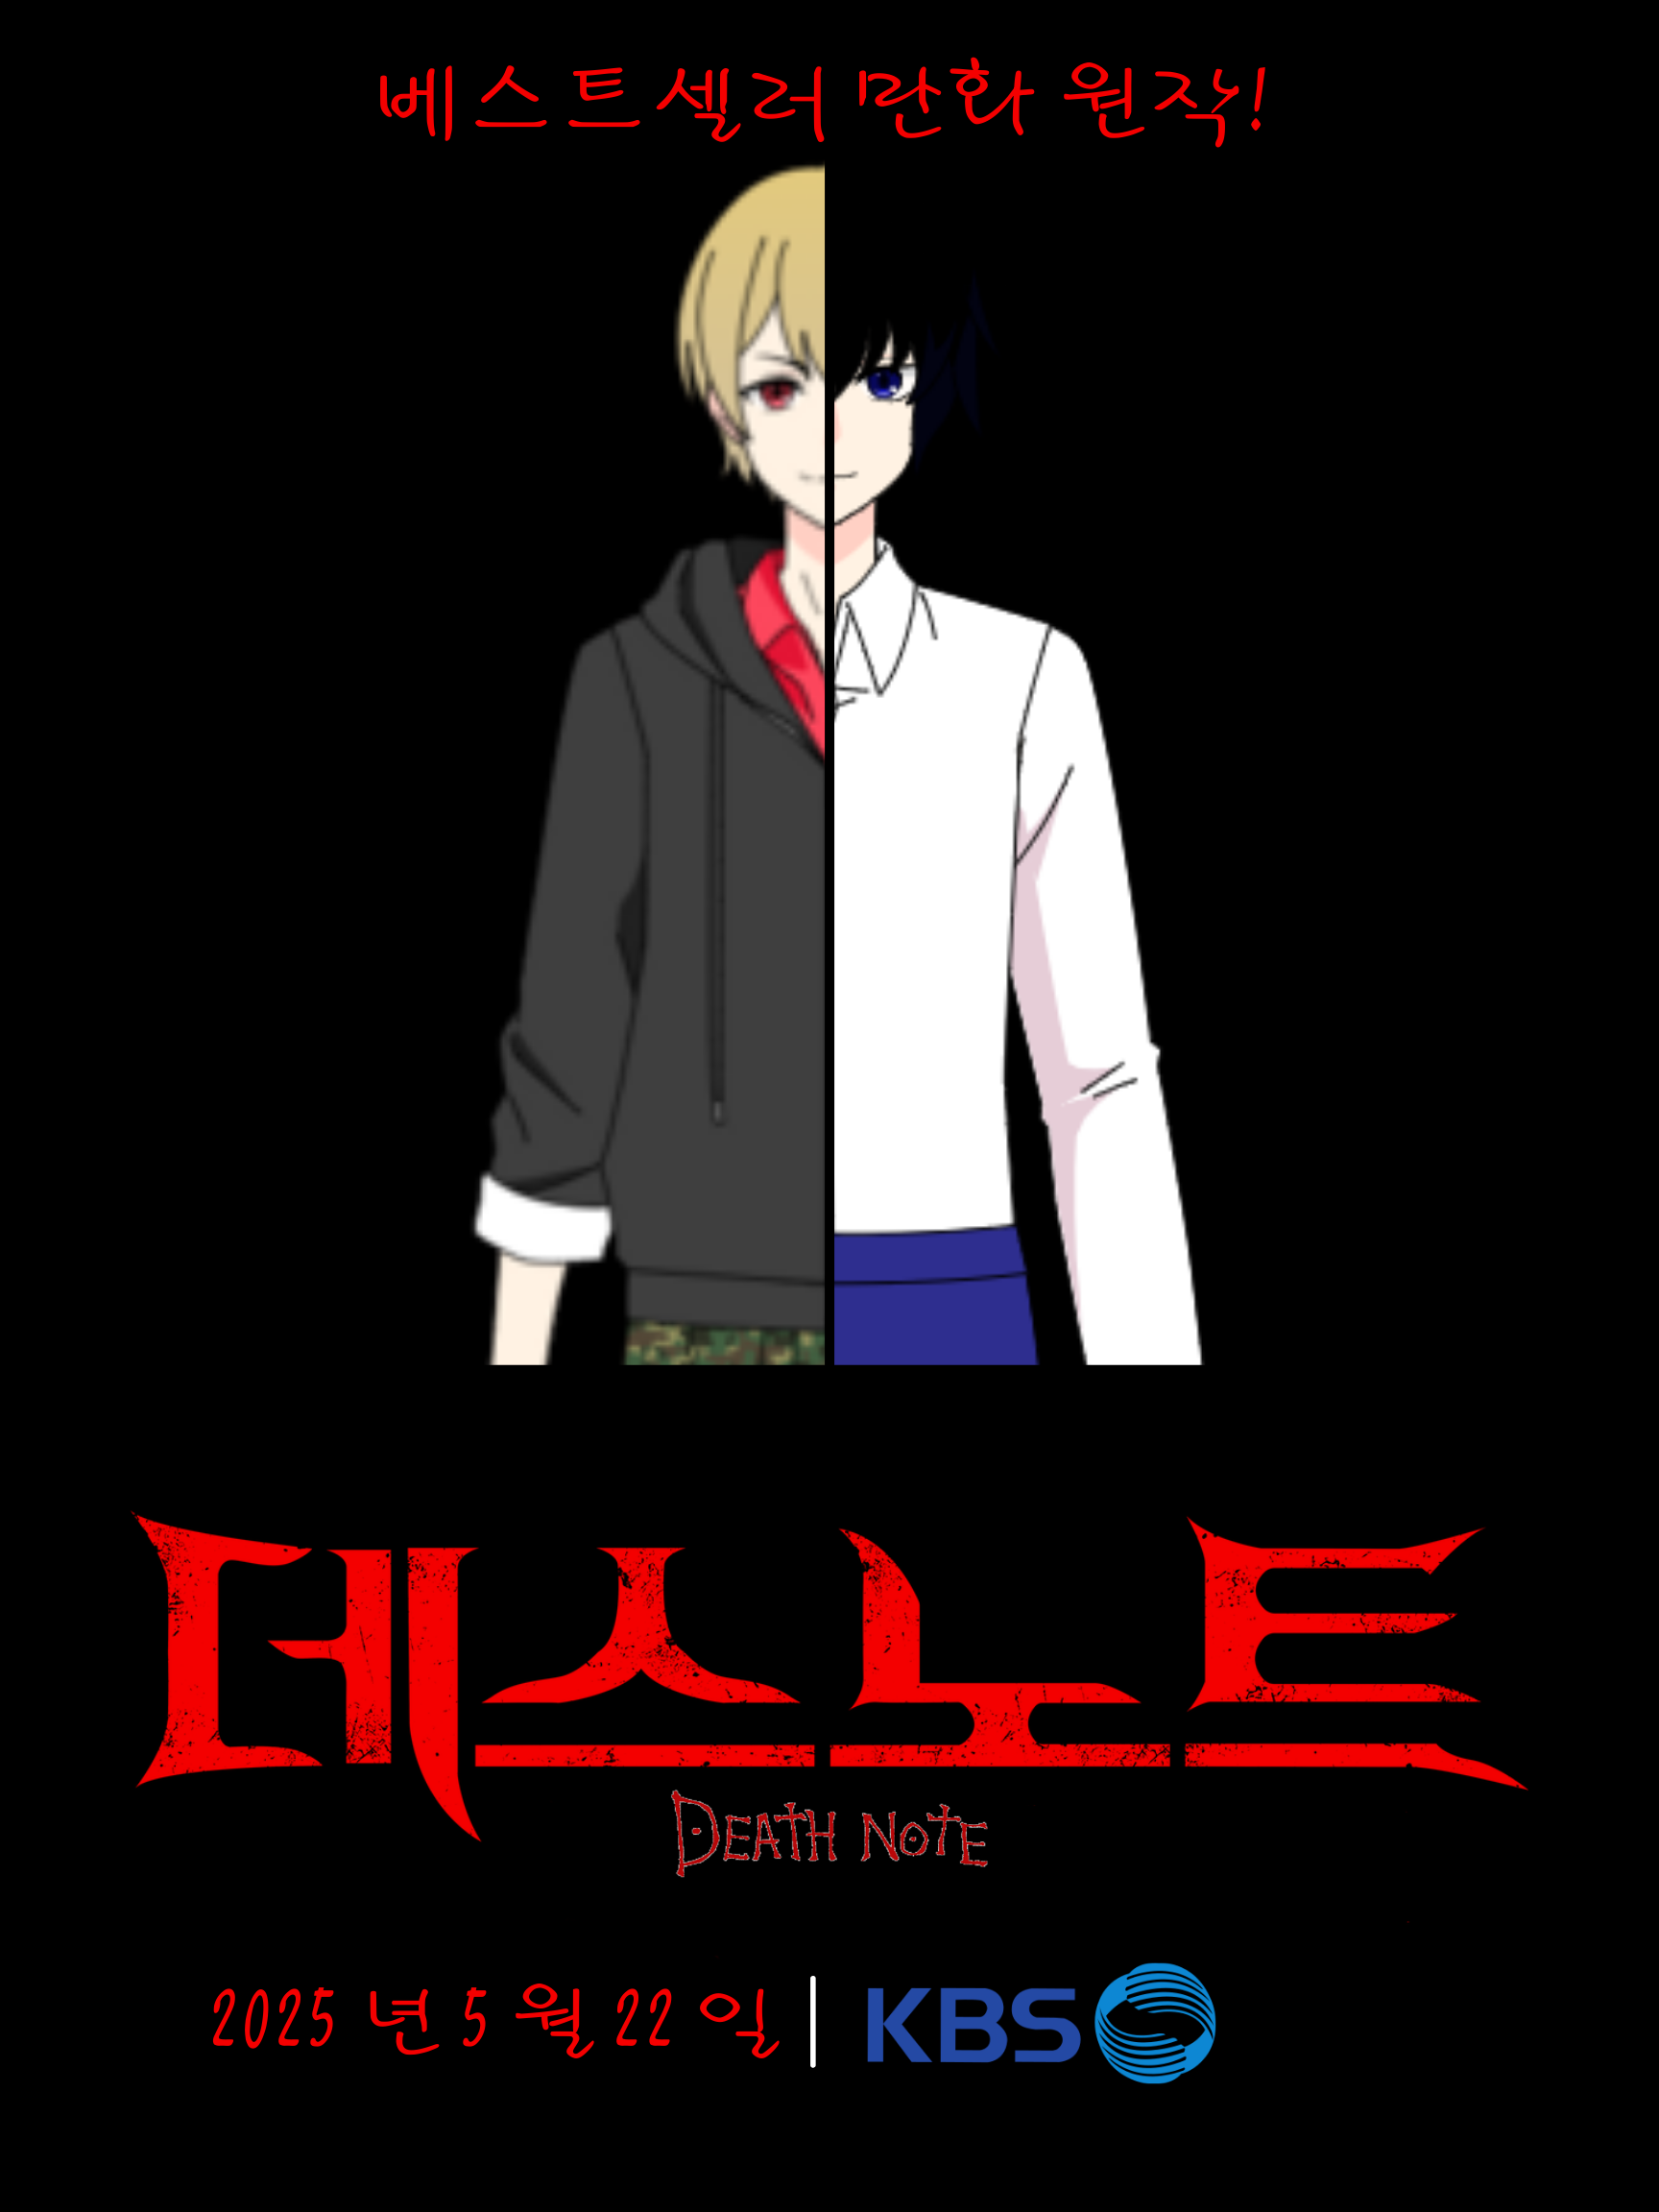 New Japanese anime by 'Death Note' creators coming out in 2021 -   - News from Singapore, Asia and around the world